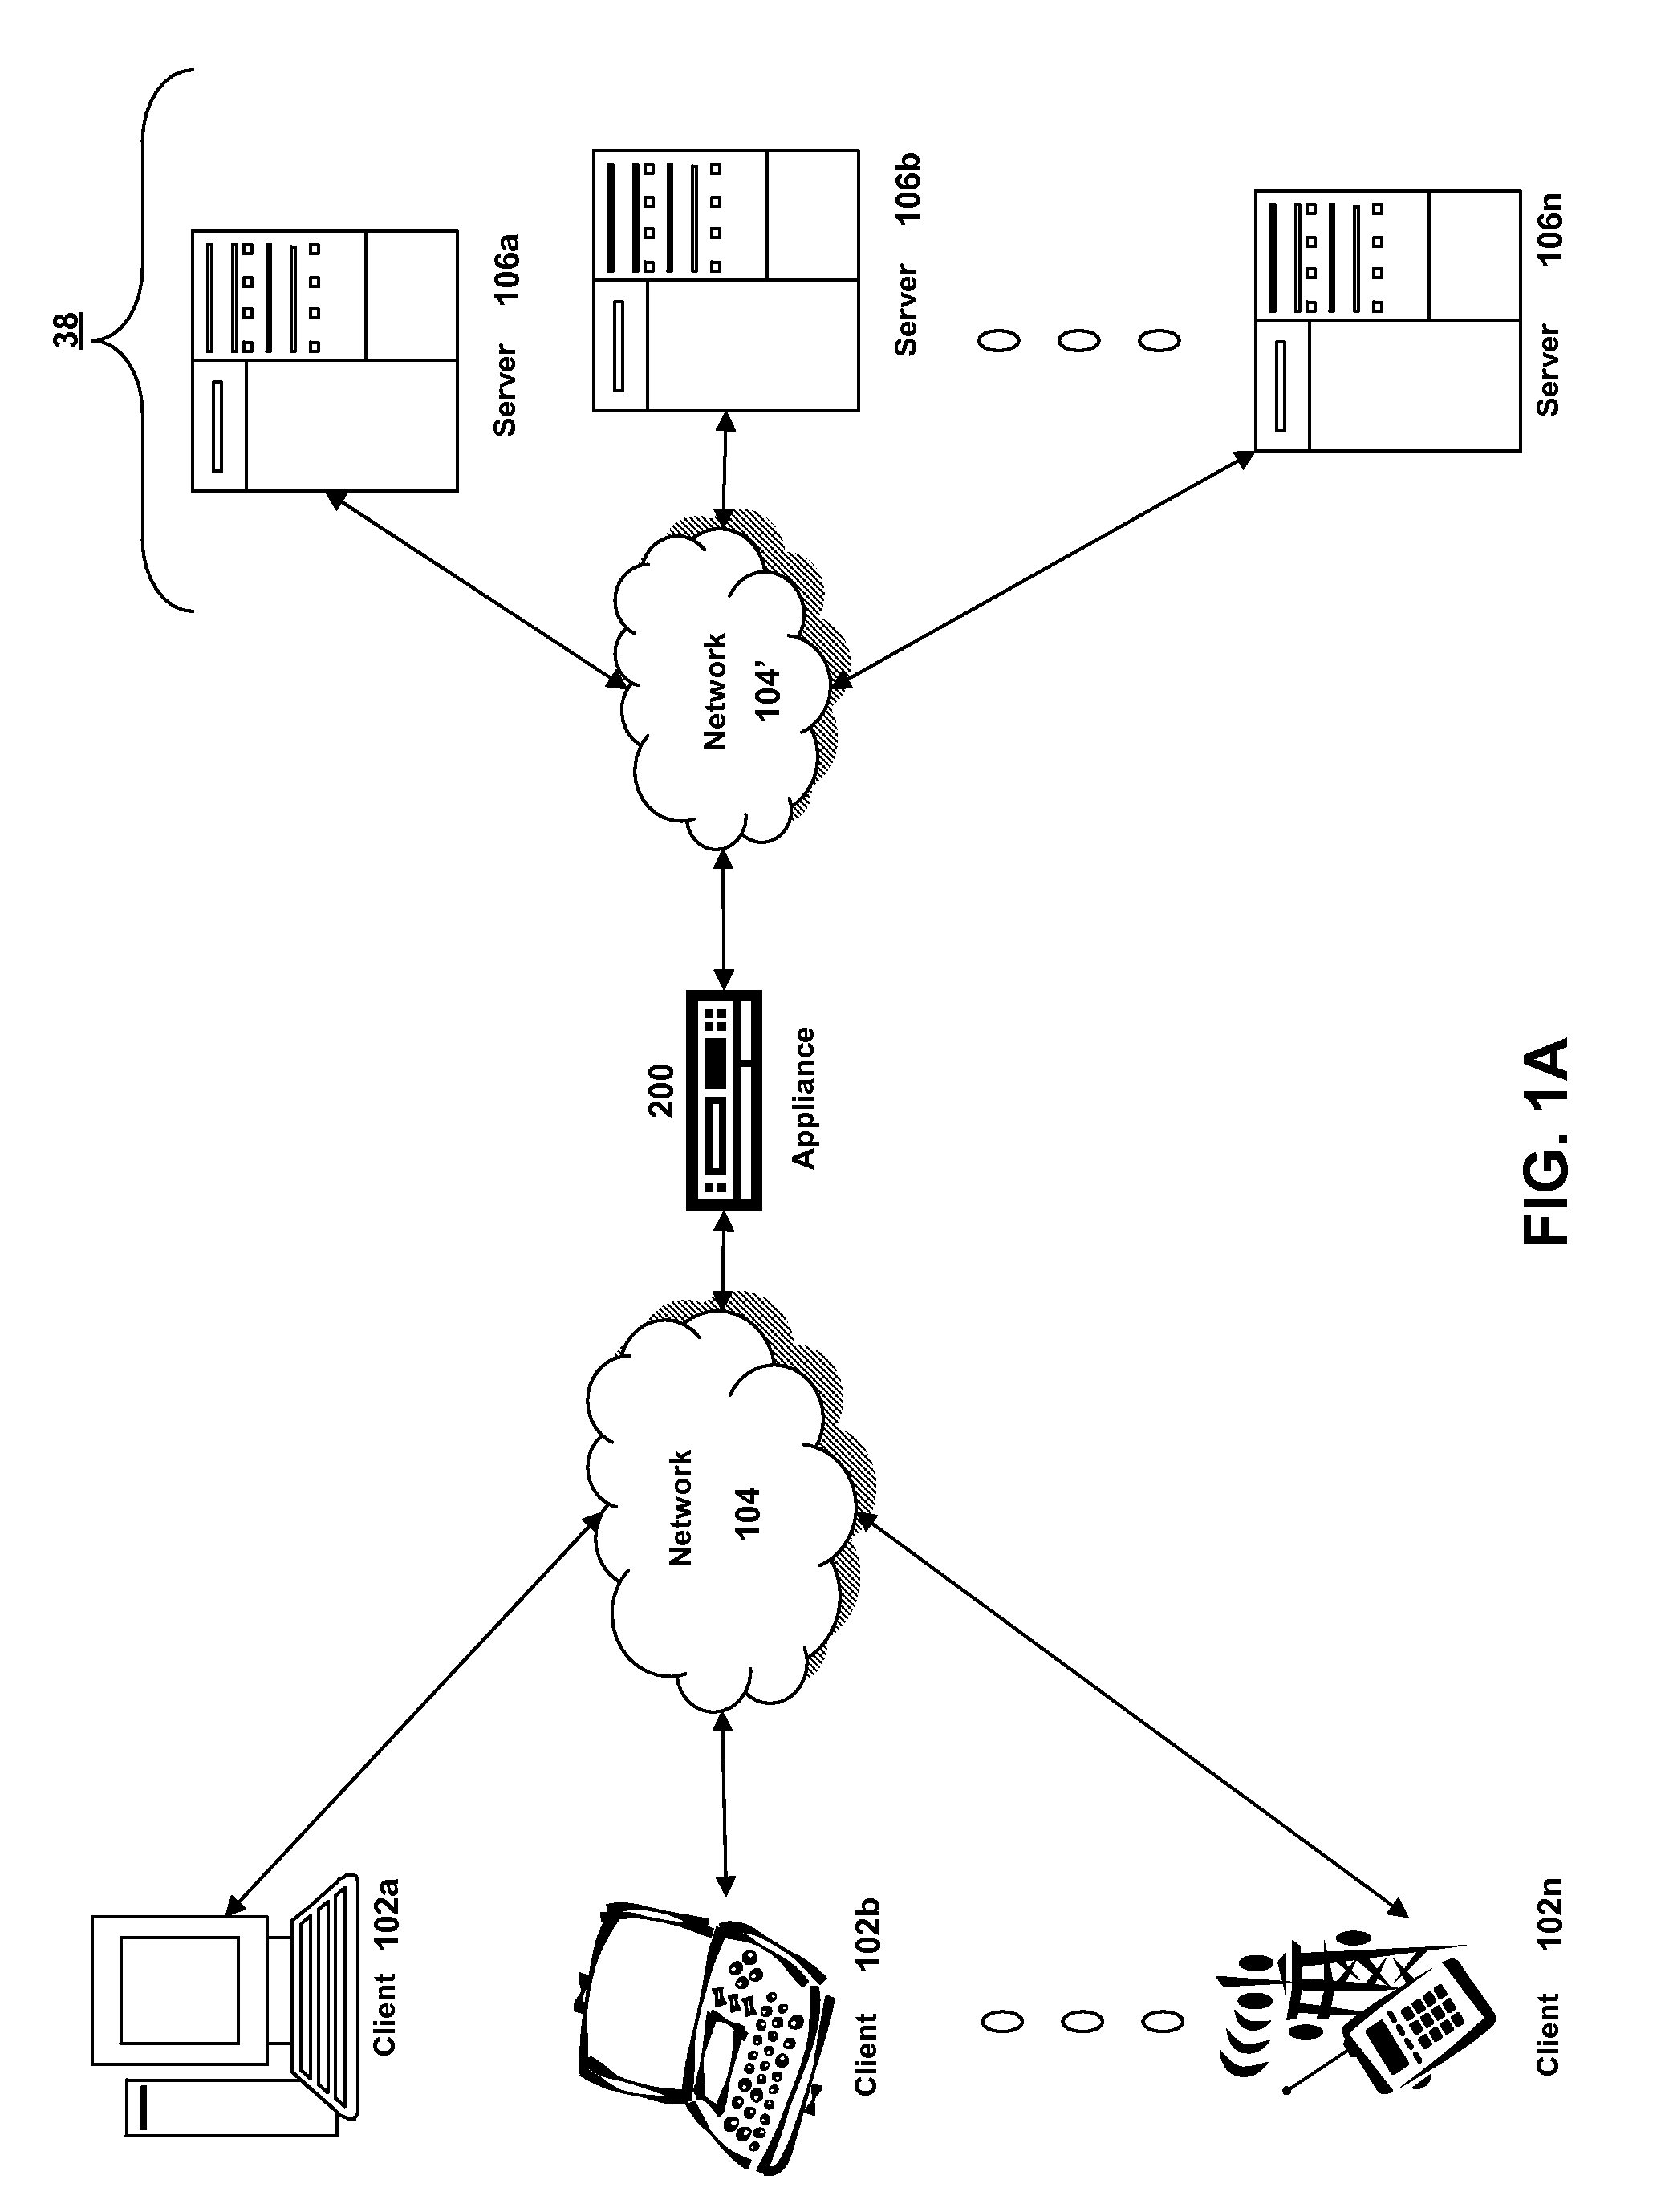 Systems and Methods for Authorizing a Client in an SSL VPN Session Failover Environment